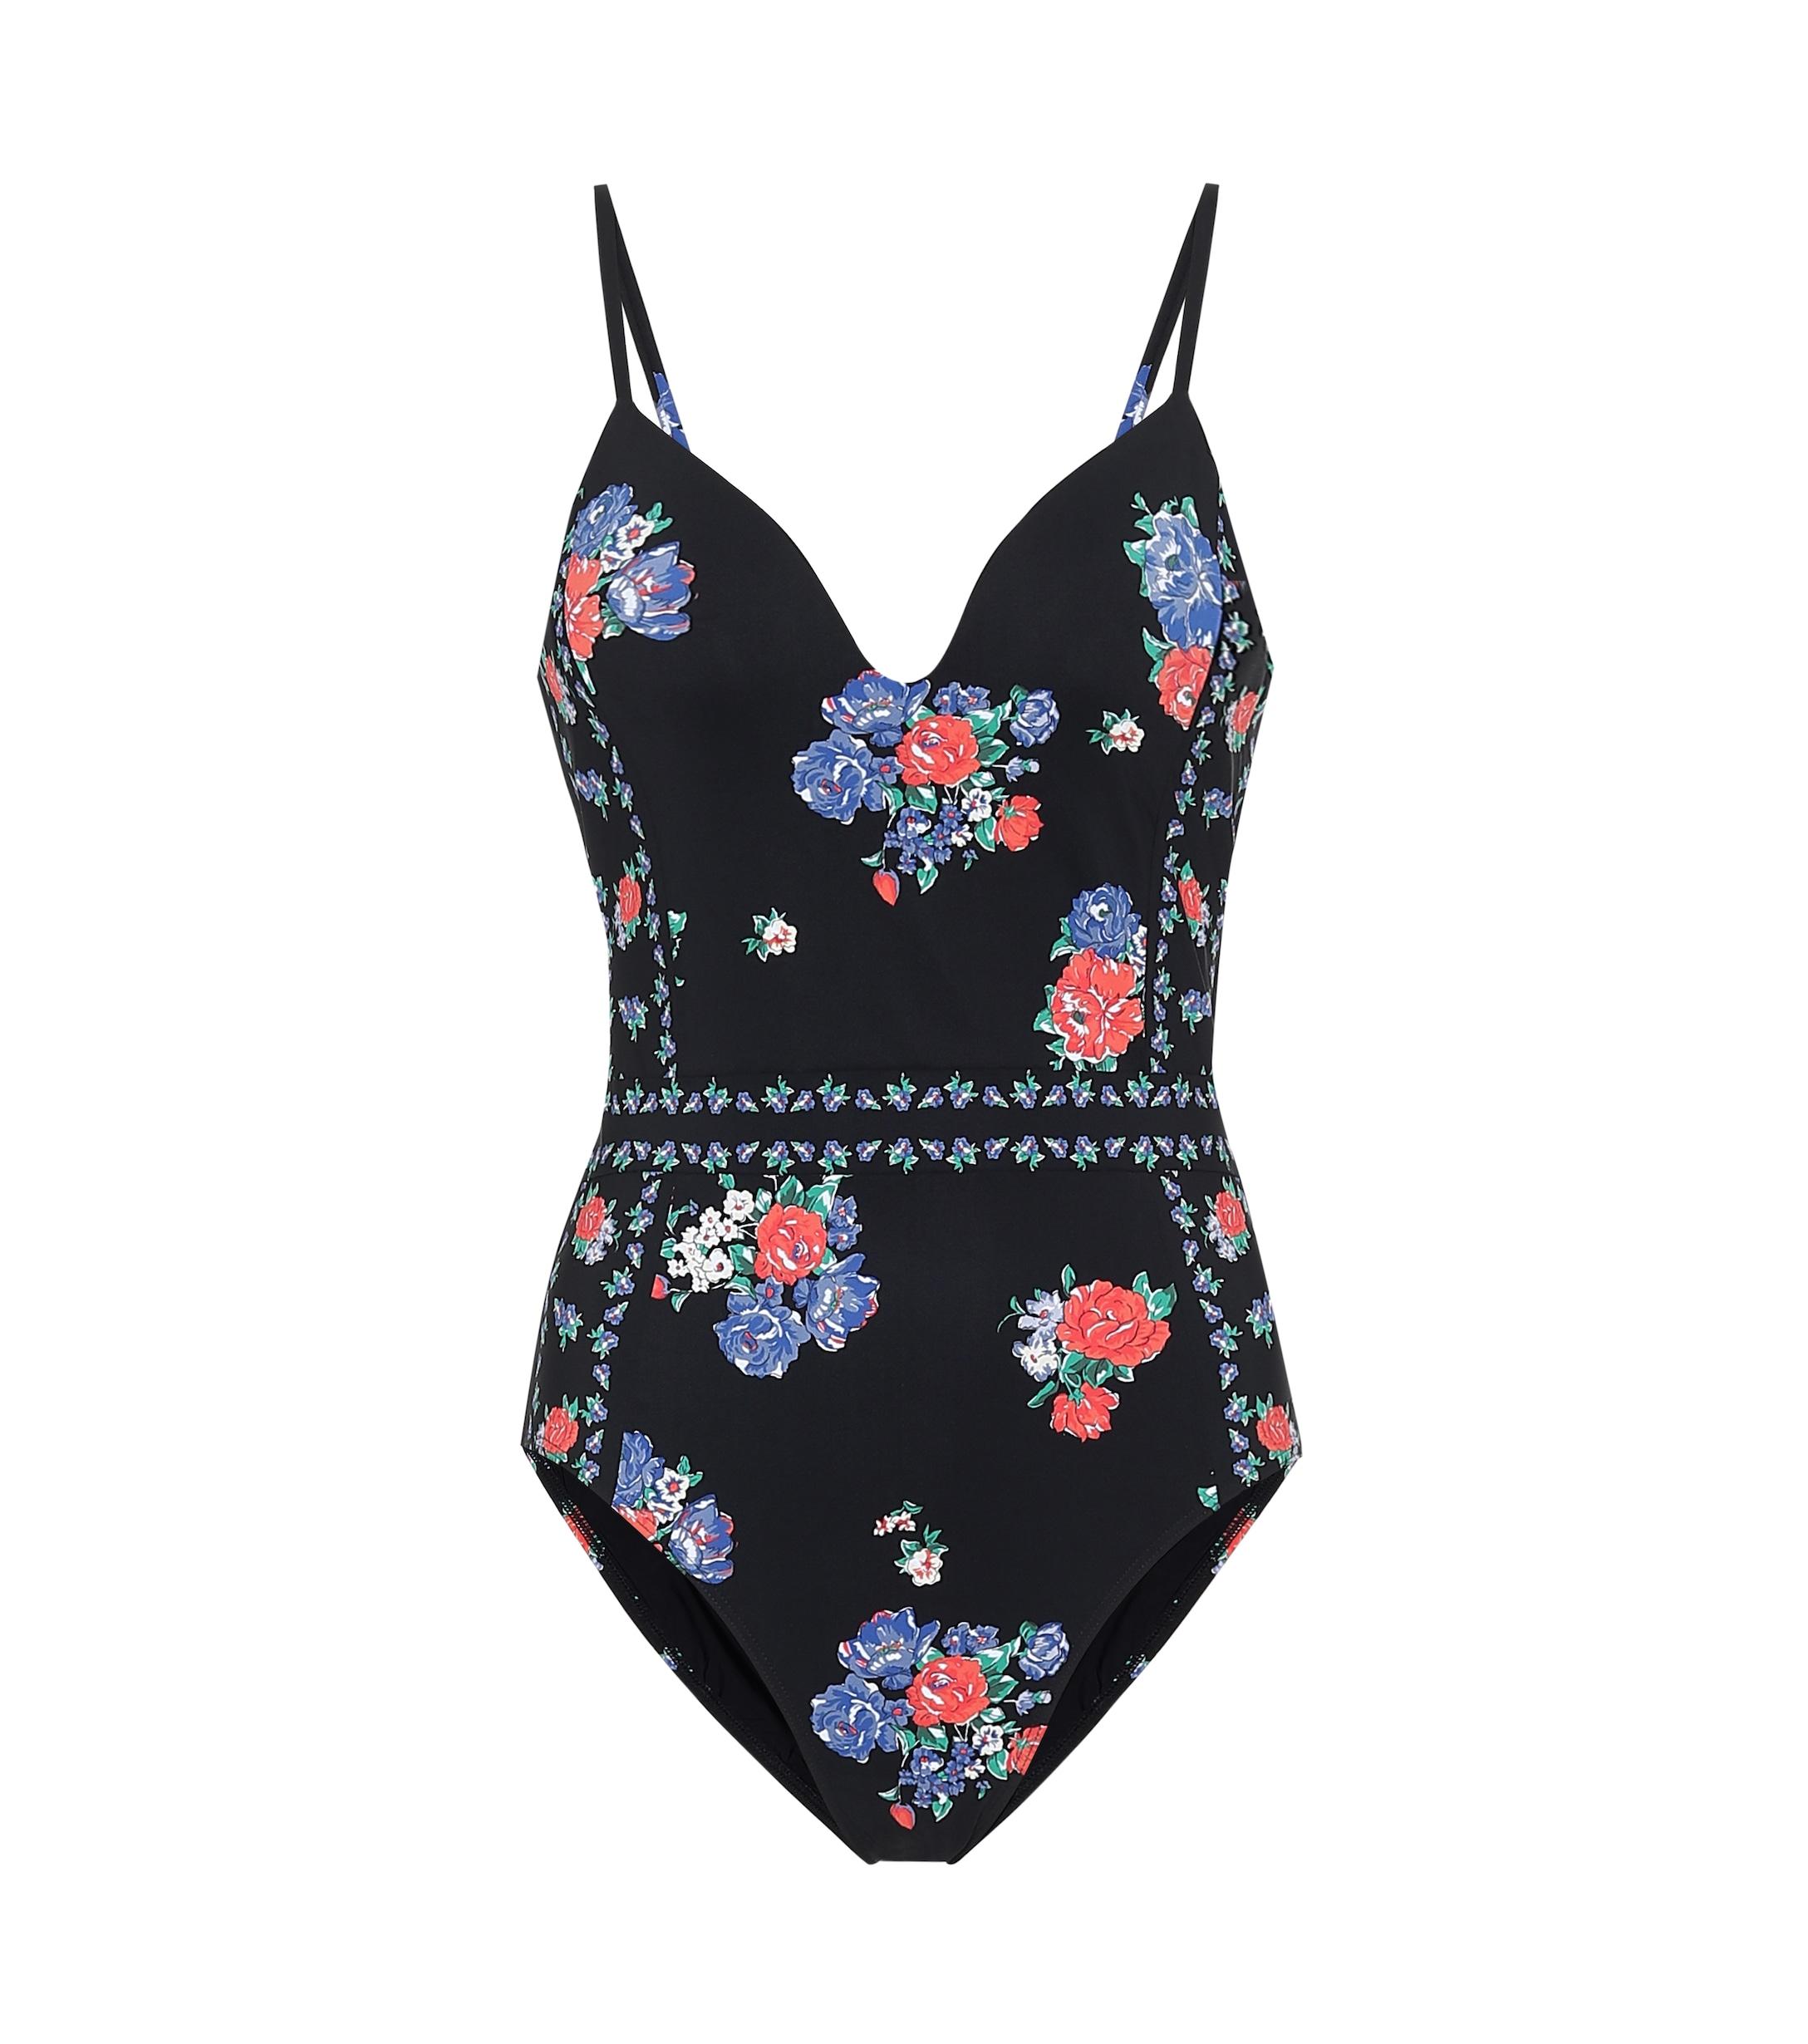 Tory Burch Floral Onepiece Swimsuit - Lyst